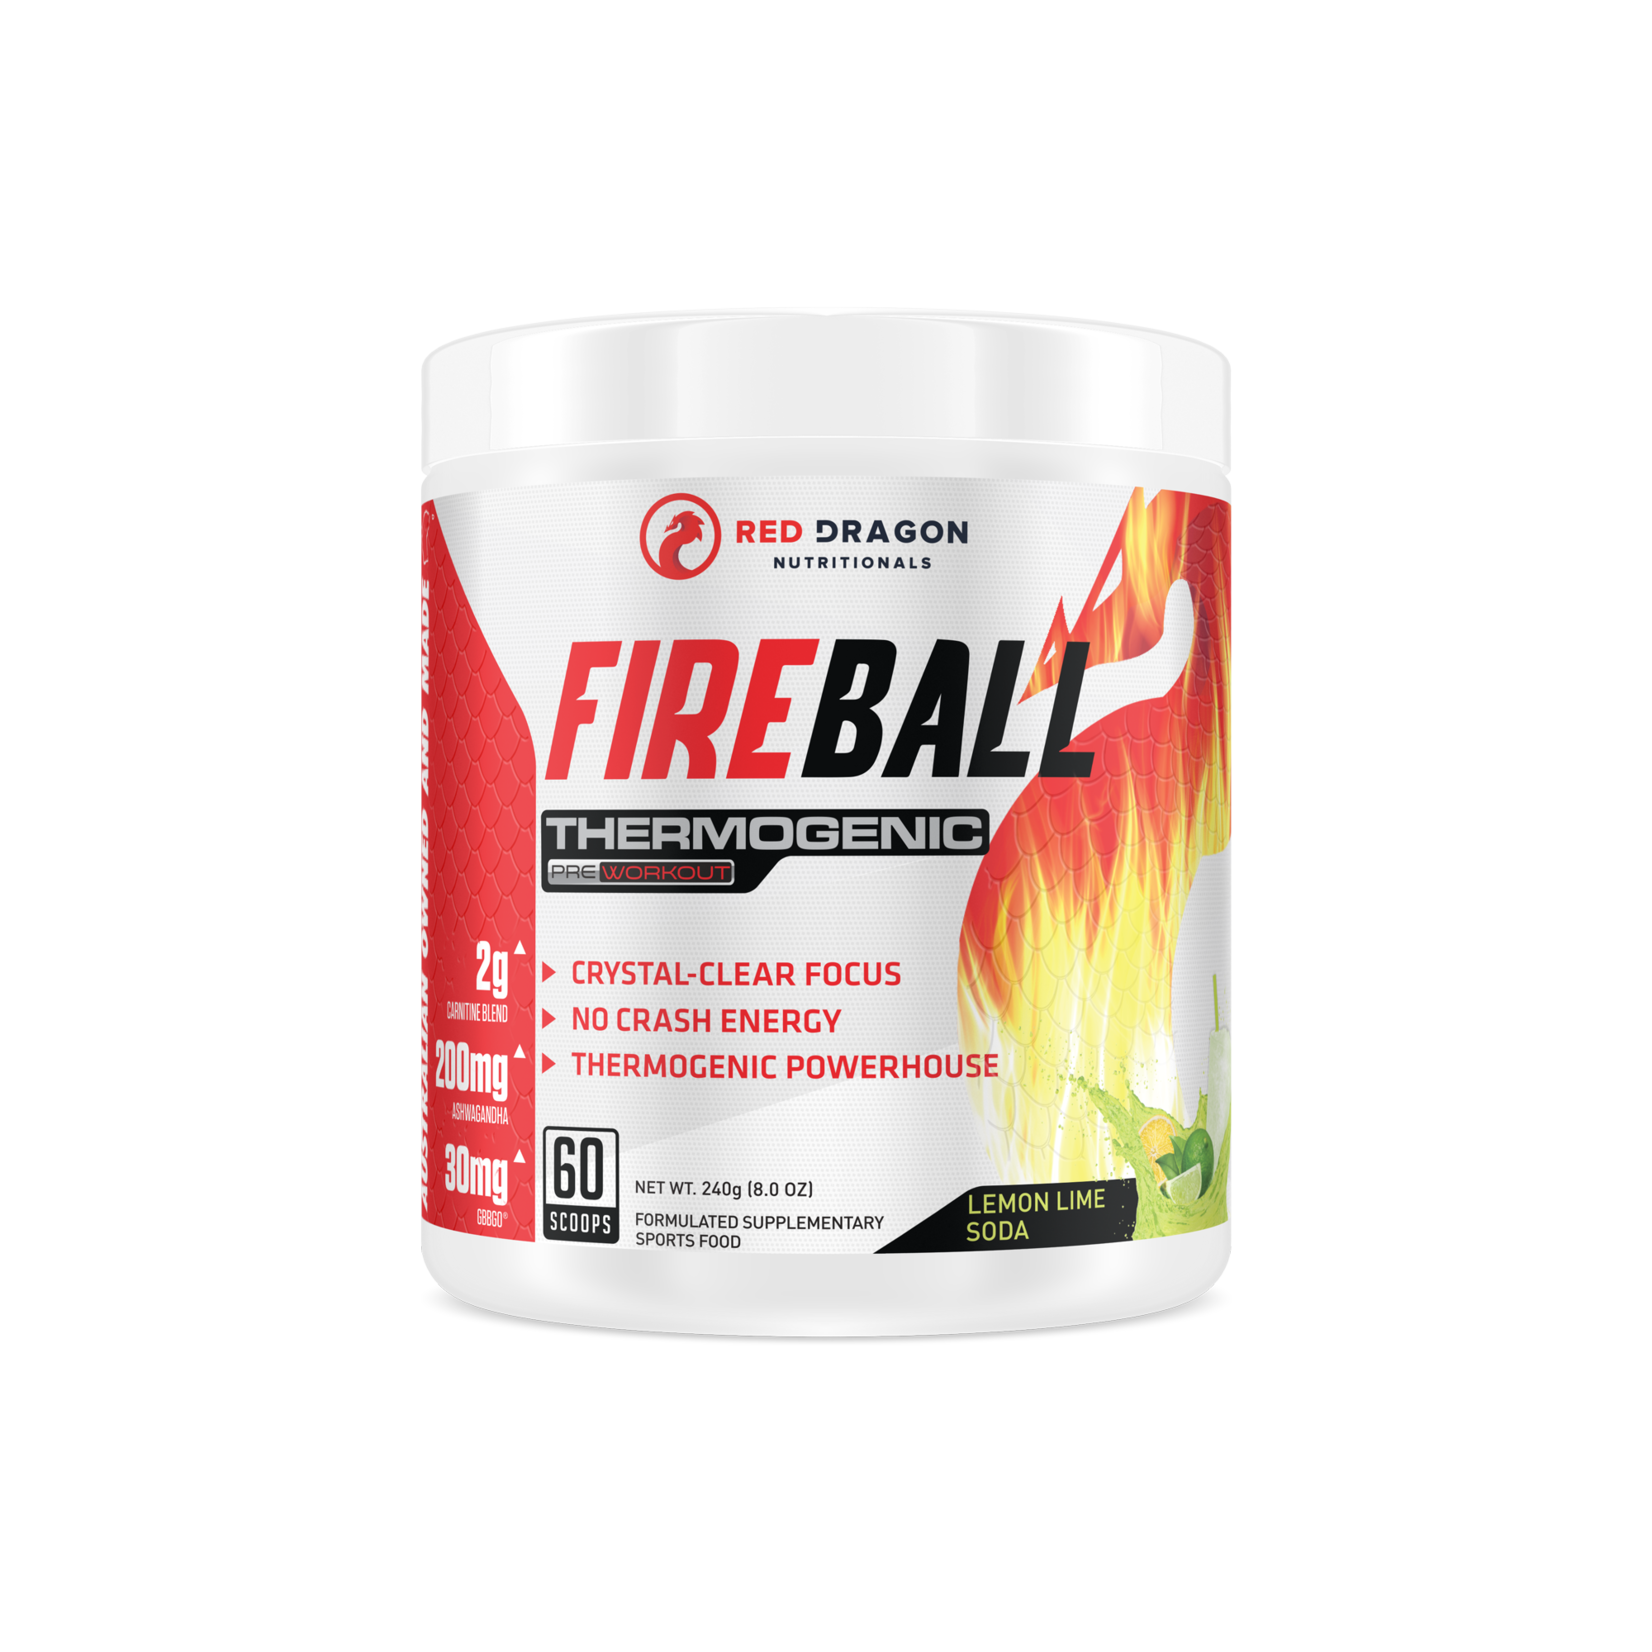 Red Dragon Nutritionals Fireball Thermogenic by Red Dragon Nutritionals